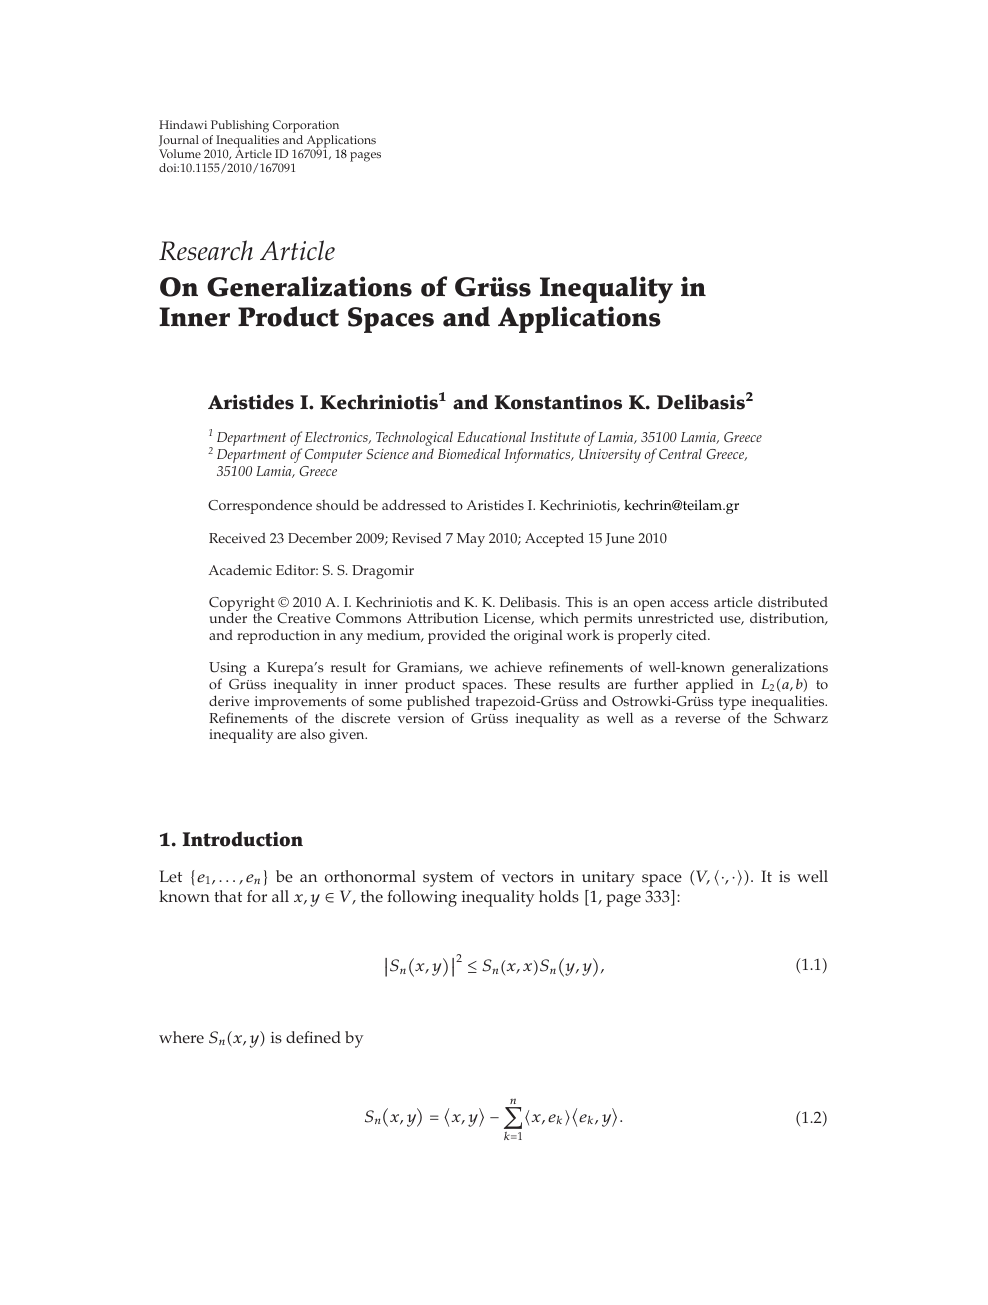 On Generalizations Of Gruss Inequality In Inner Product Spaces And Applications Topic Of Research Paper In Mathematics Download Scholarly Article Pdf And Read For Free On Cyberleninka Open Science Hub